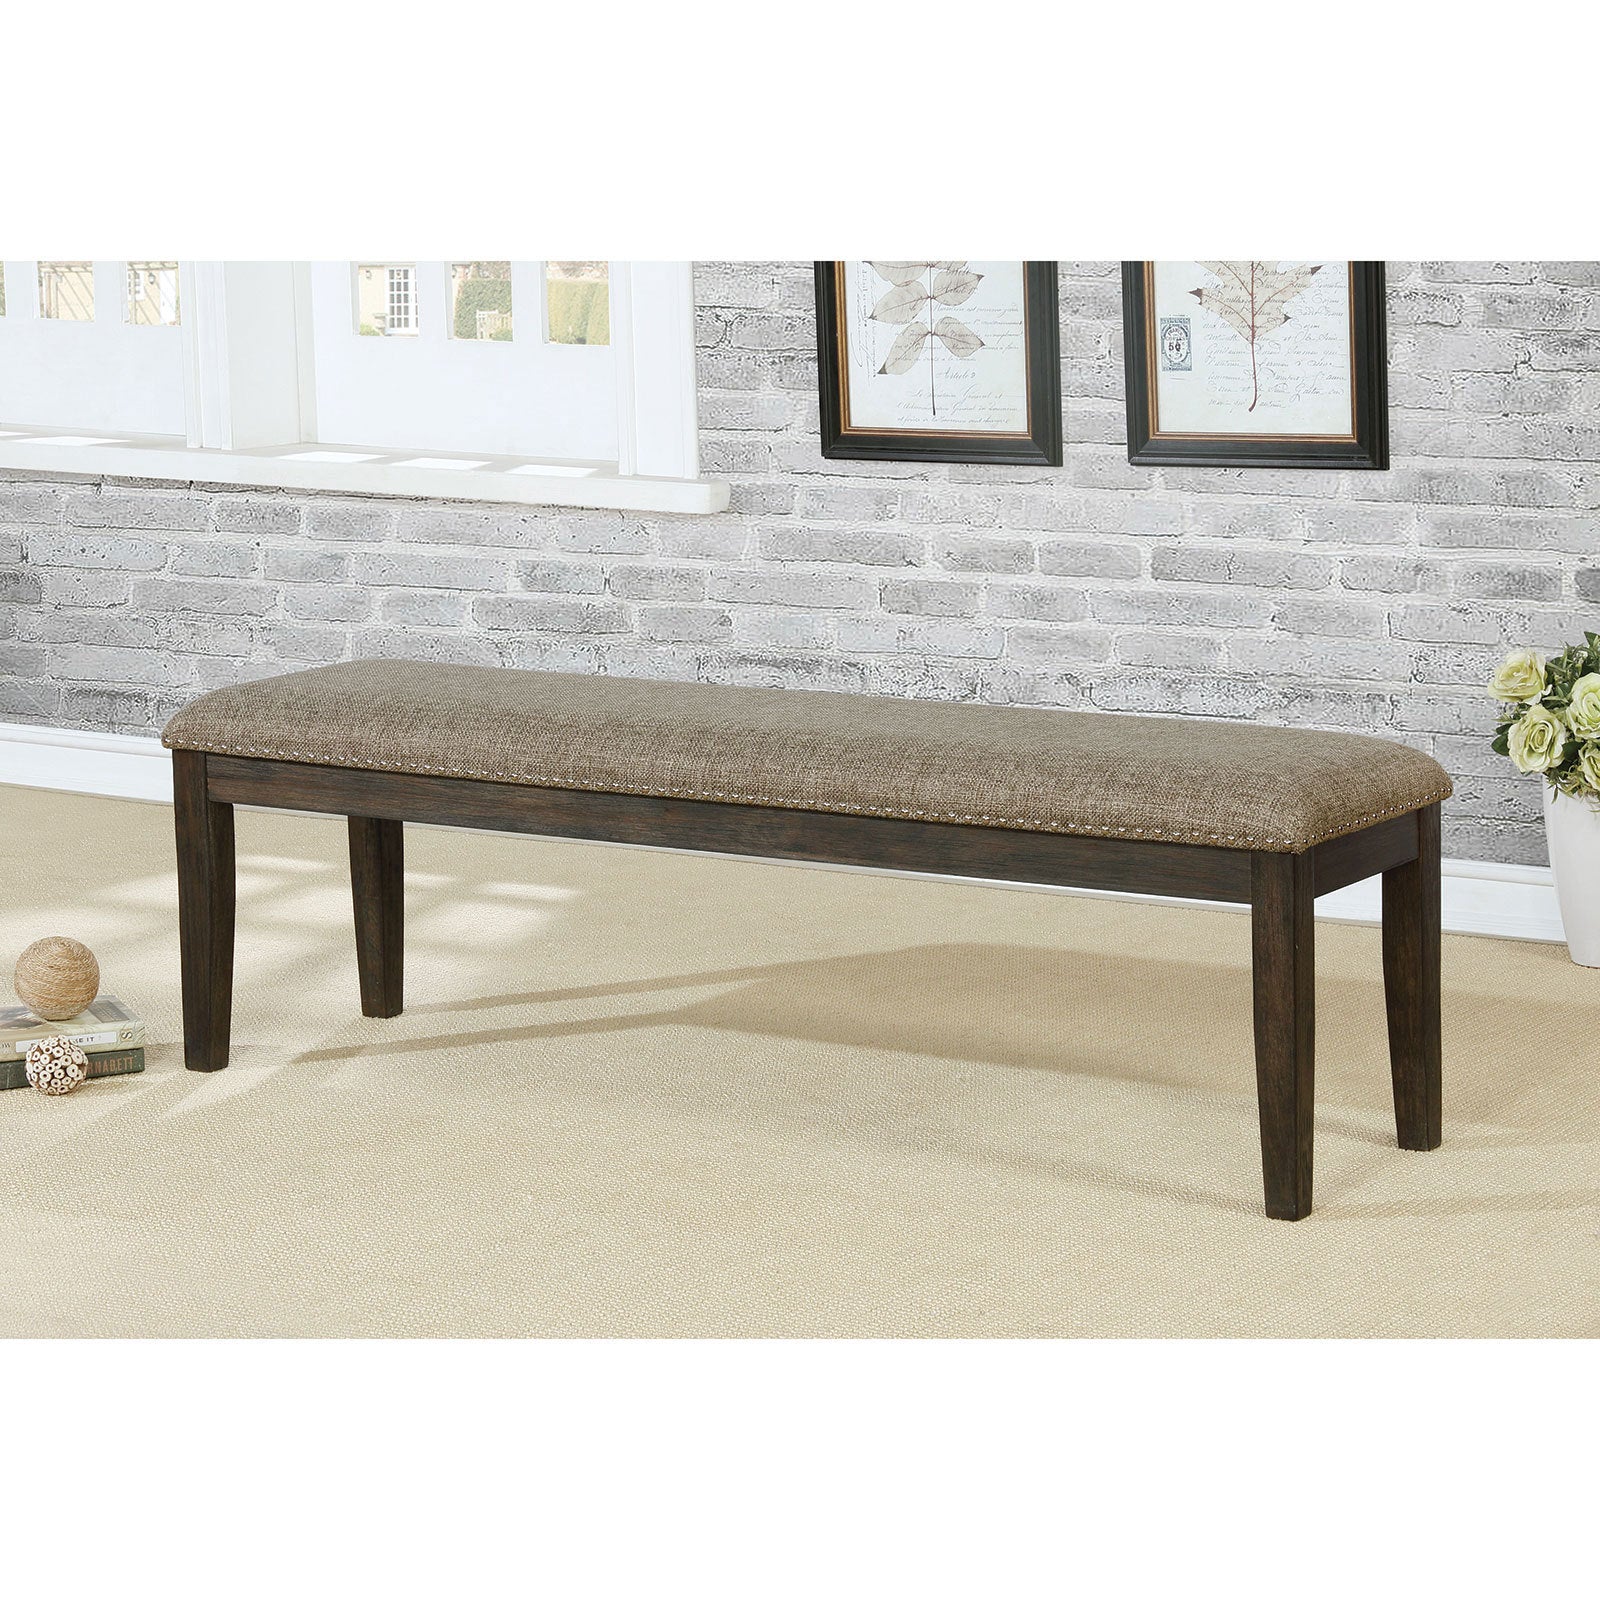 Transitional 1pc BENCH Only Espresso Warm Gray Nail warm grey-dining room-contemporary-modern-solid